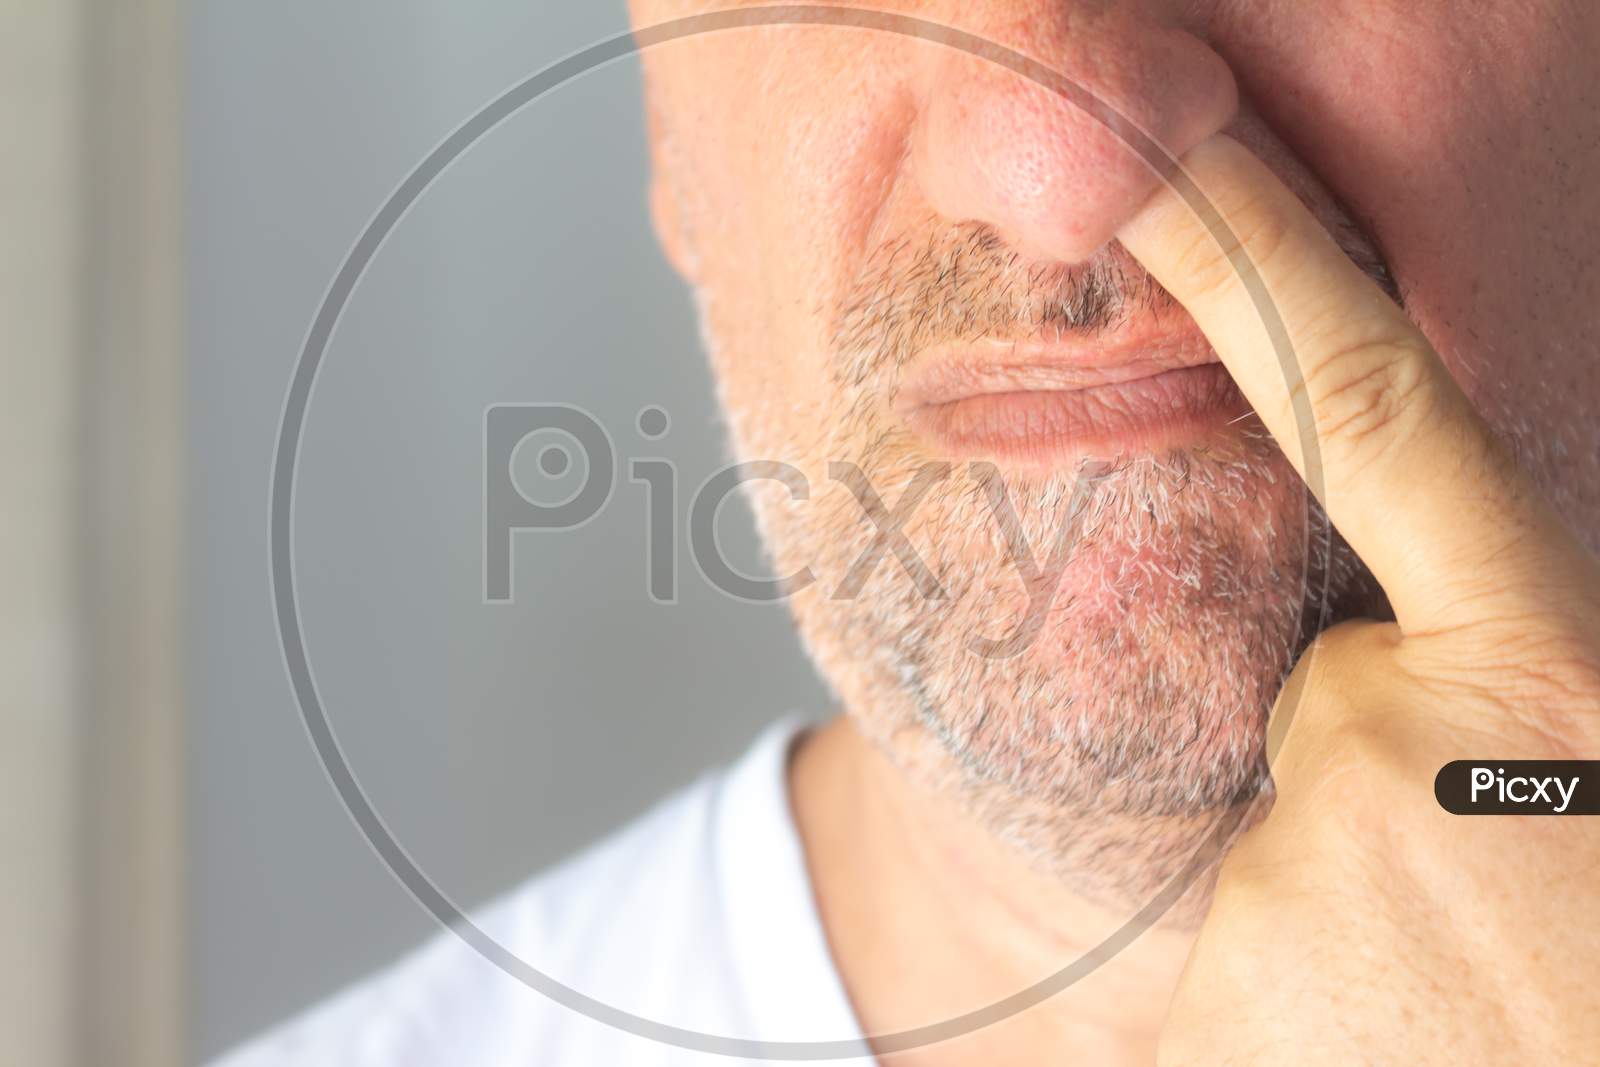 Caucasian Middle-Aged Man With Slightly Grown Beard. Man With His Finger Up His Nose.